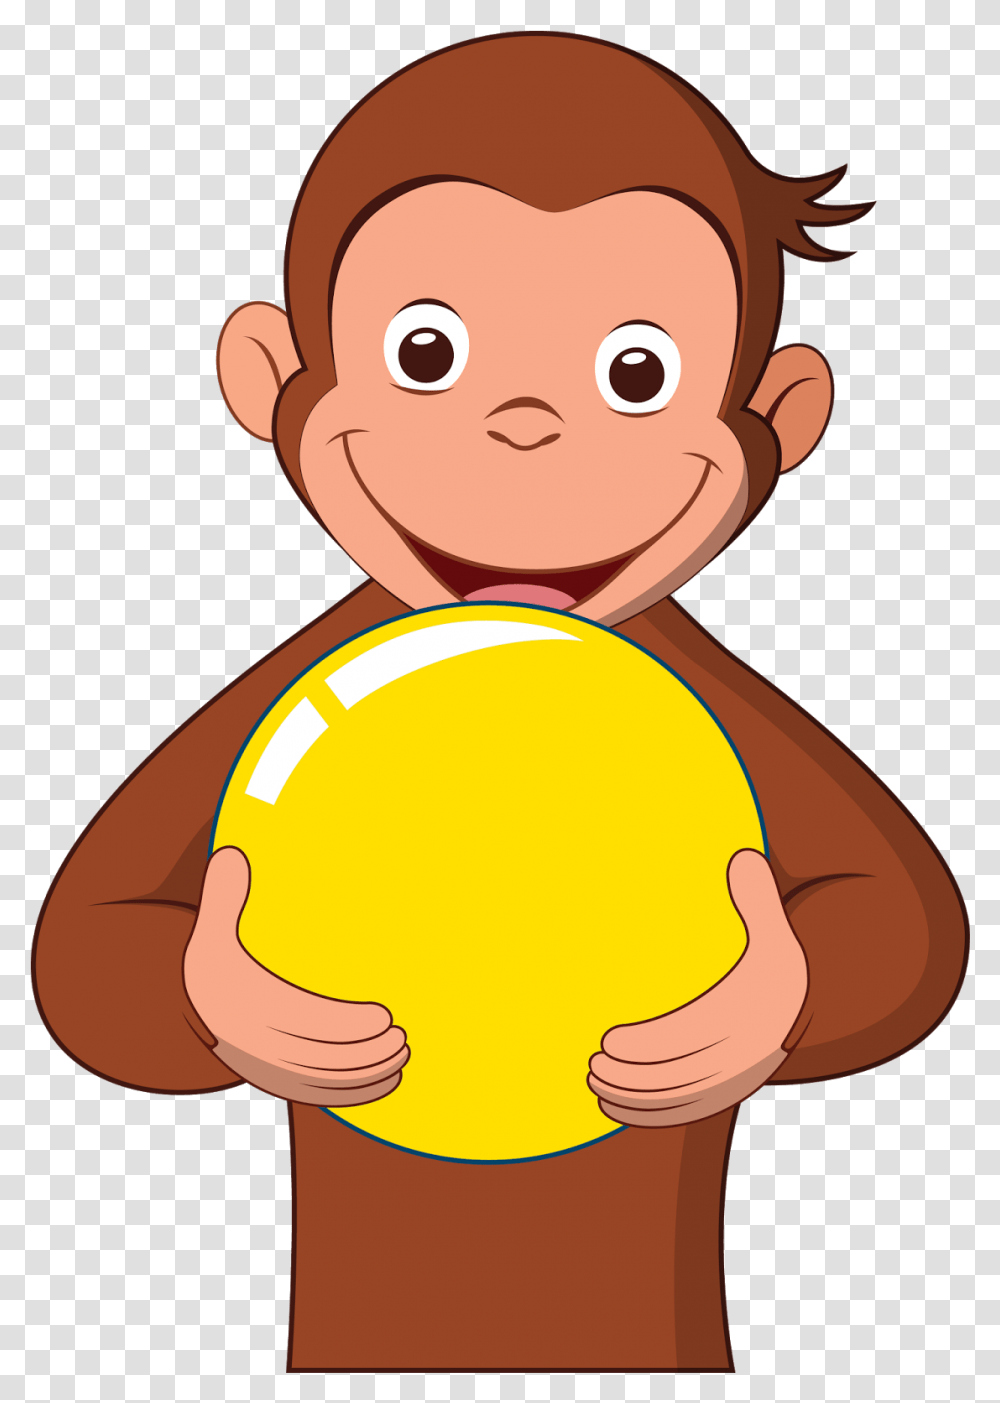 Download Image Result For Curious Birthday Printable Curious George, Sphere, Ball, Face, Outdoors Transparent Png